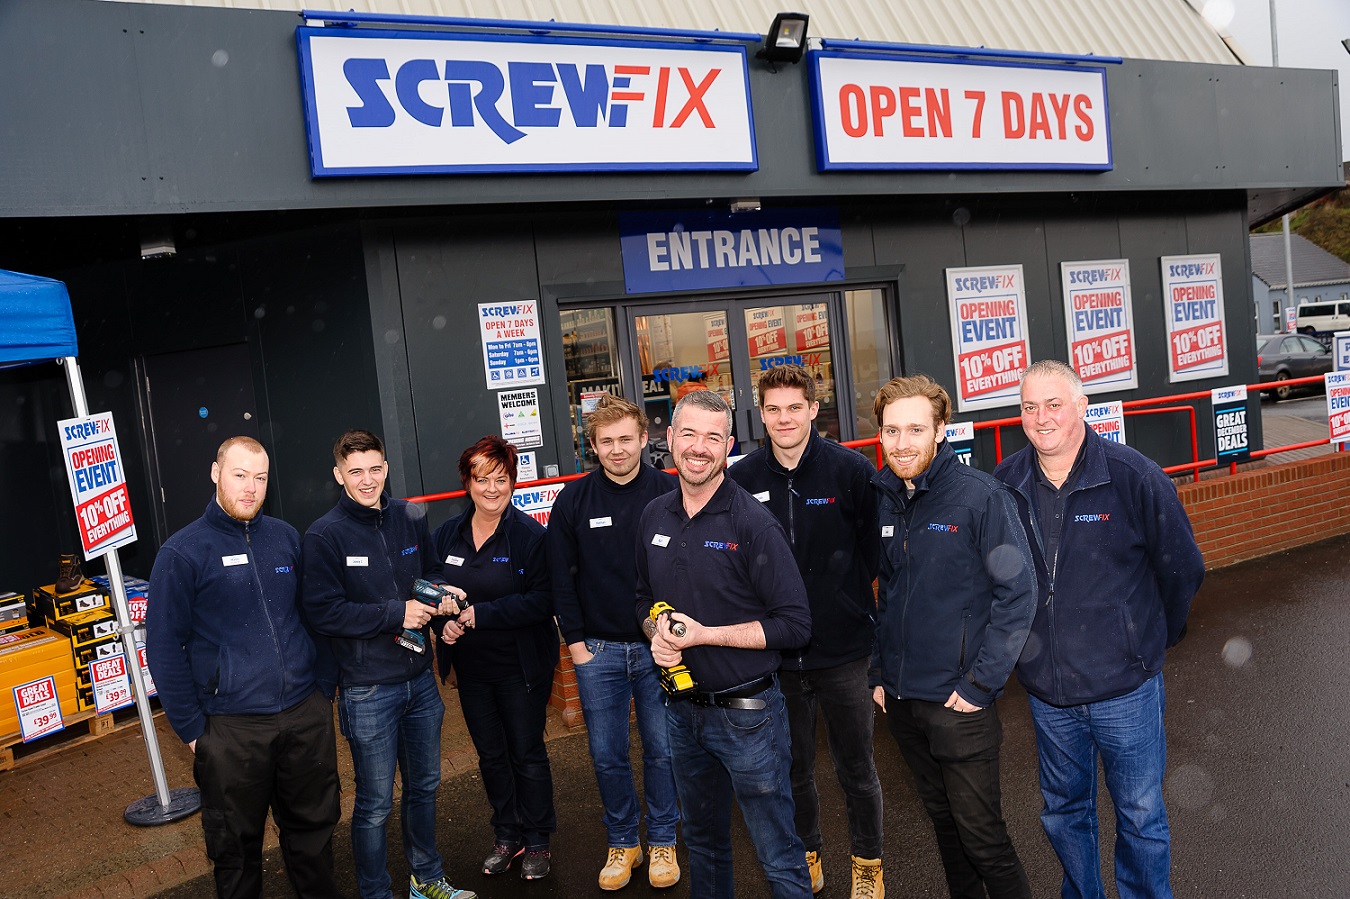 Omagh Screwfix Store is declared a runaway success